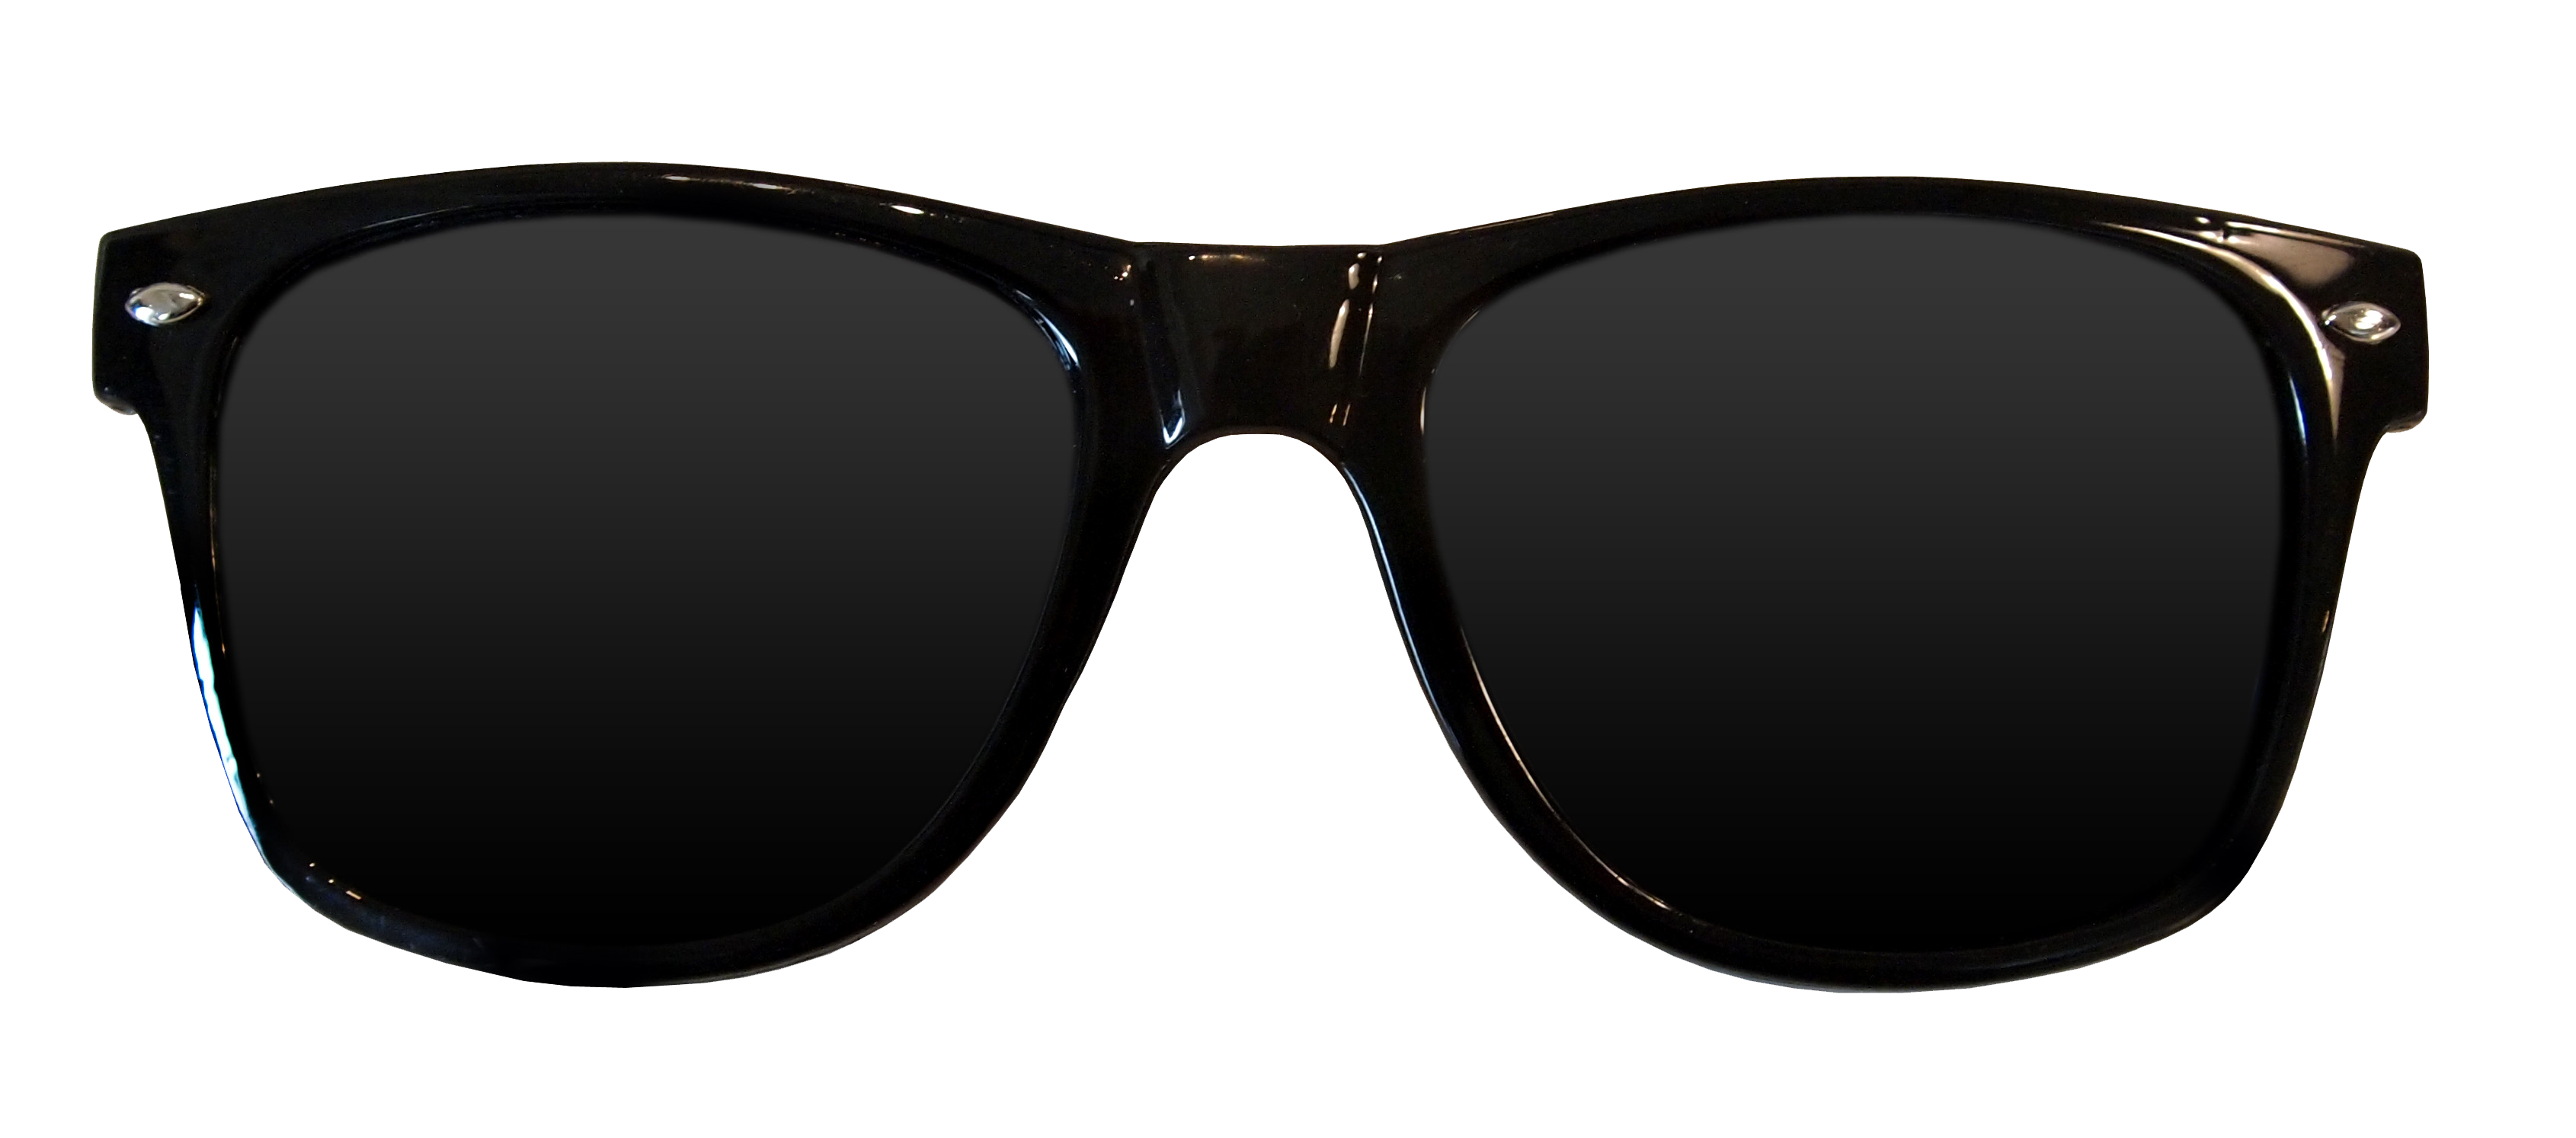 Sunglasses Picture PNG Image